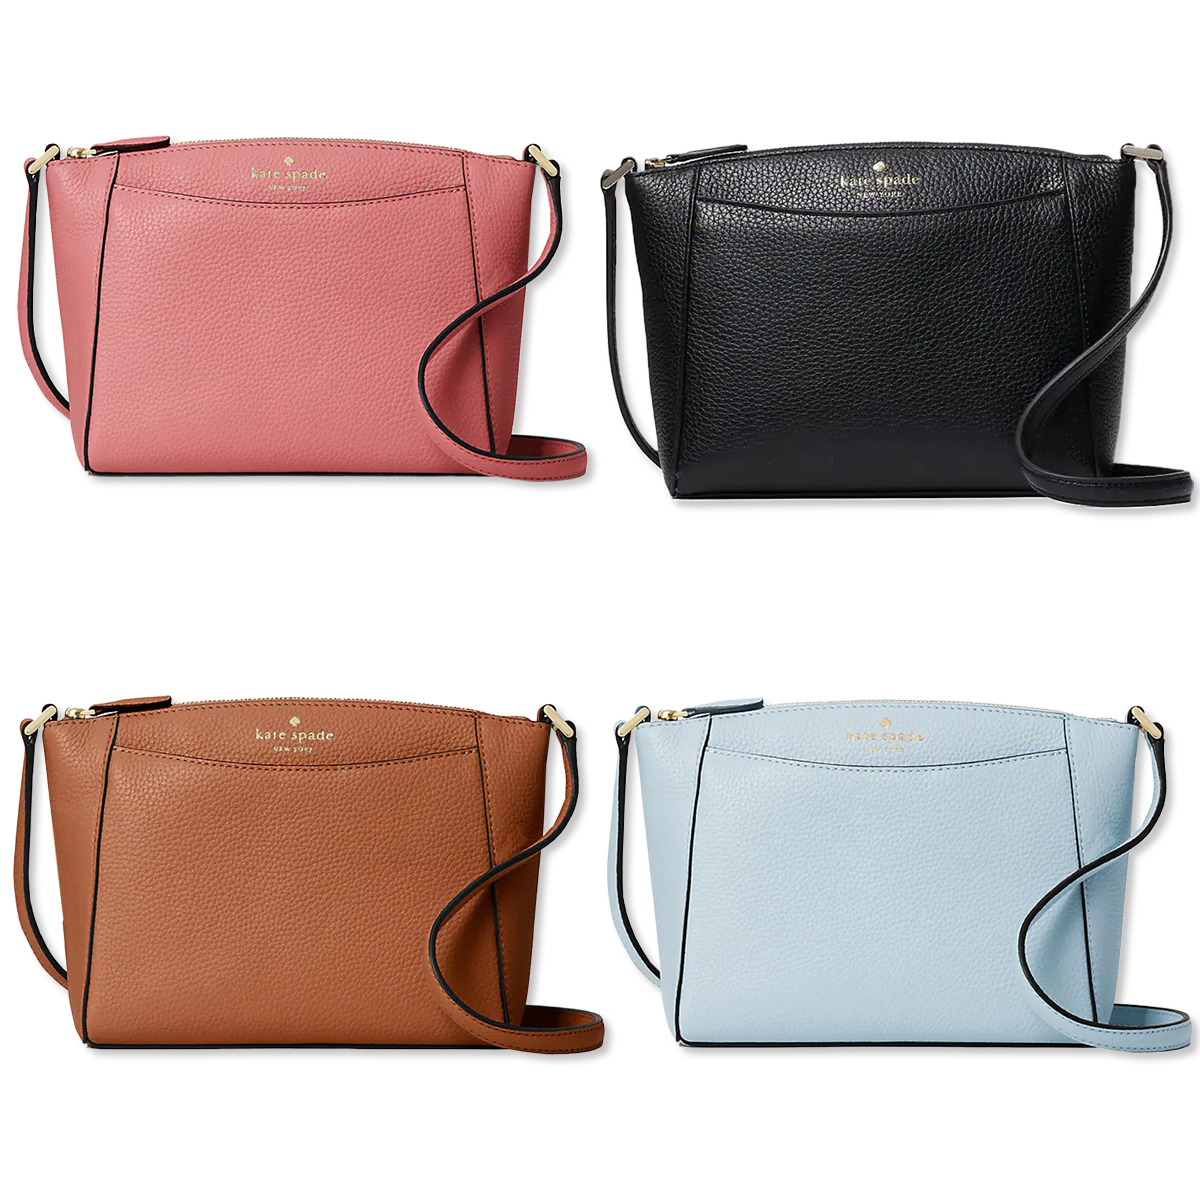 Kate Spade 24-Hour Flash Deal: Get a $280 Crossbody Bag for Just $87